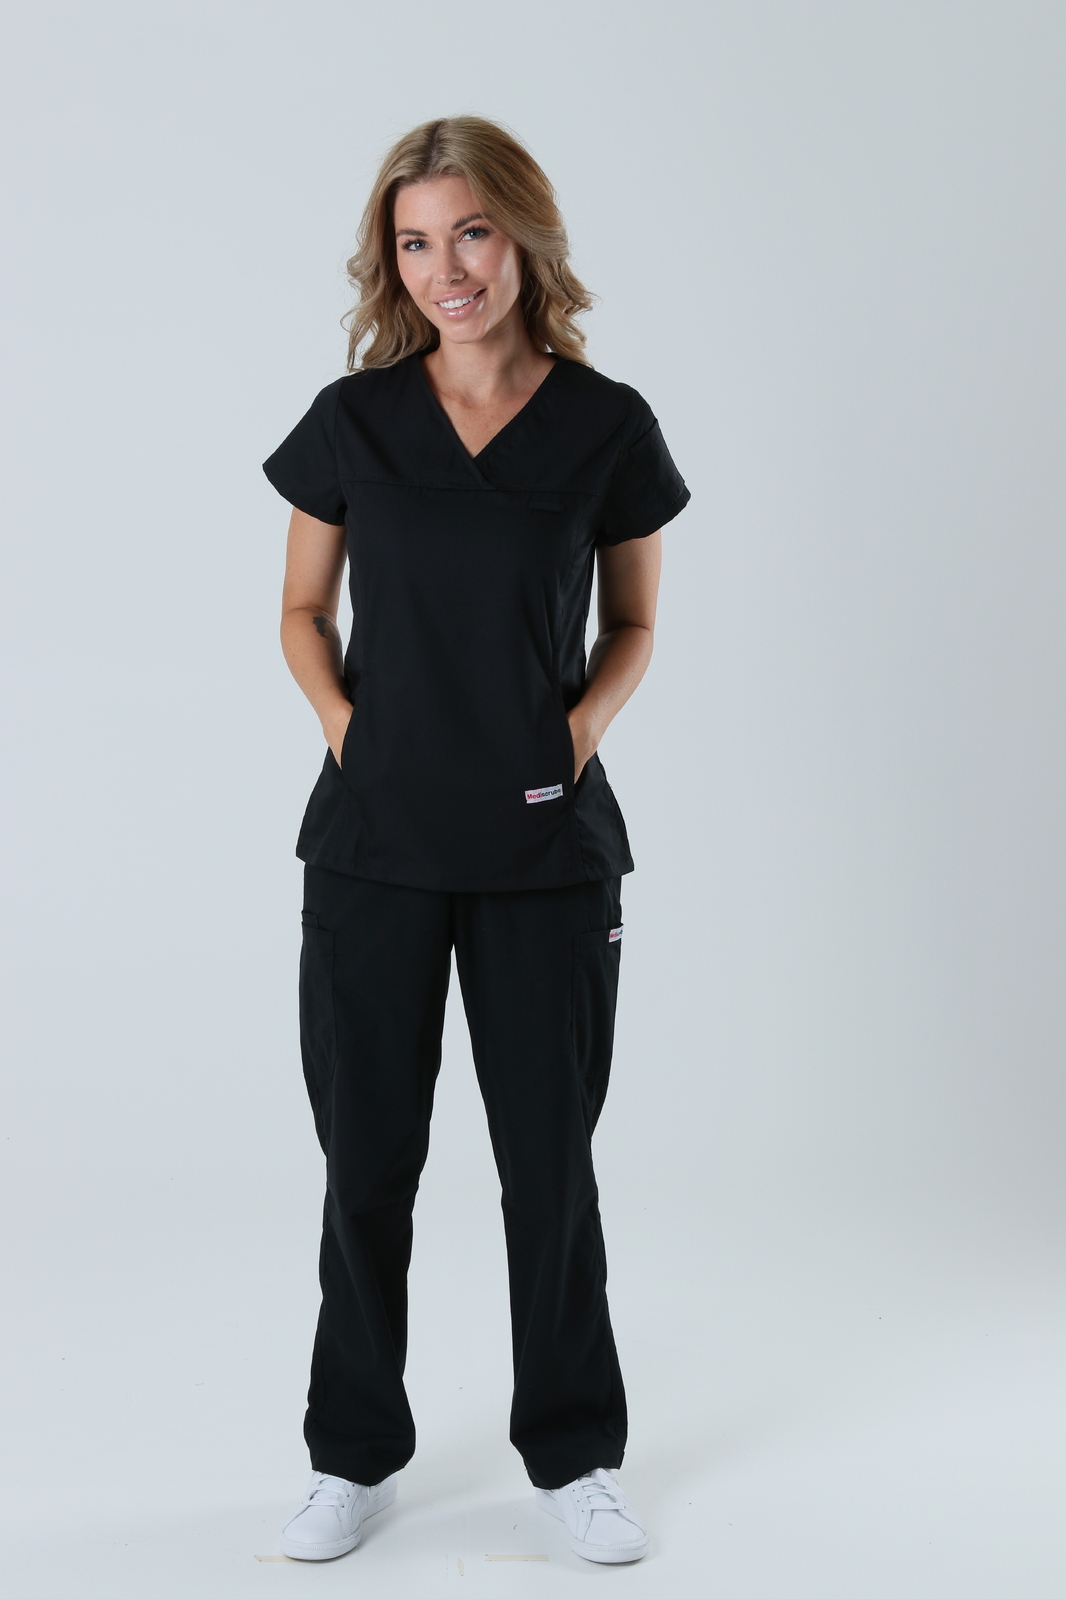 Canberra Hospital Medical Imaging Radiographer Uniform Set Bundle (Wome'ns Fit Solid Top and Cargo Pants in Black + Logos)